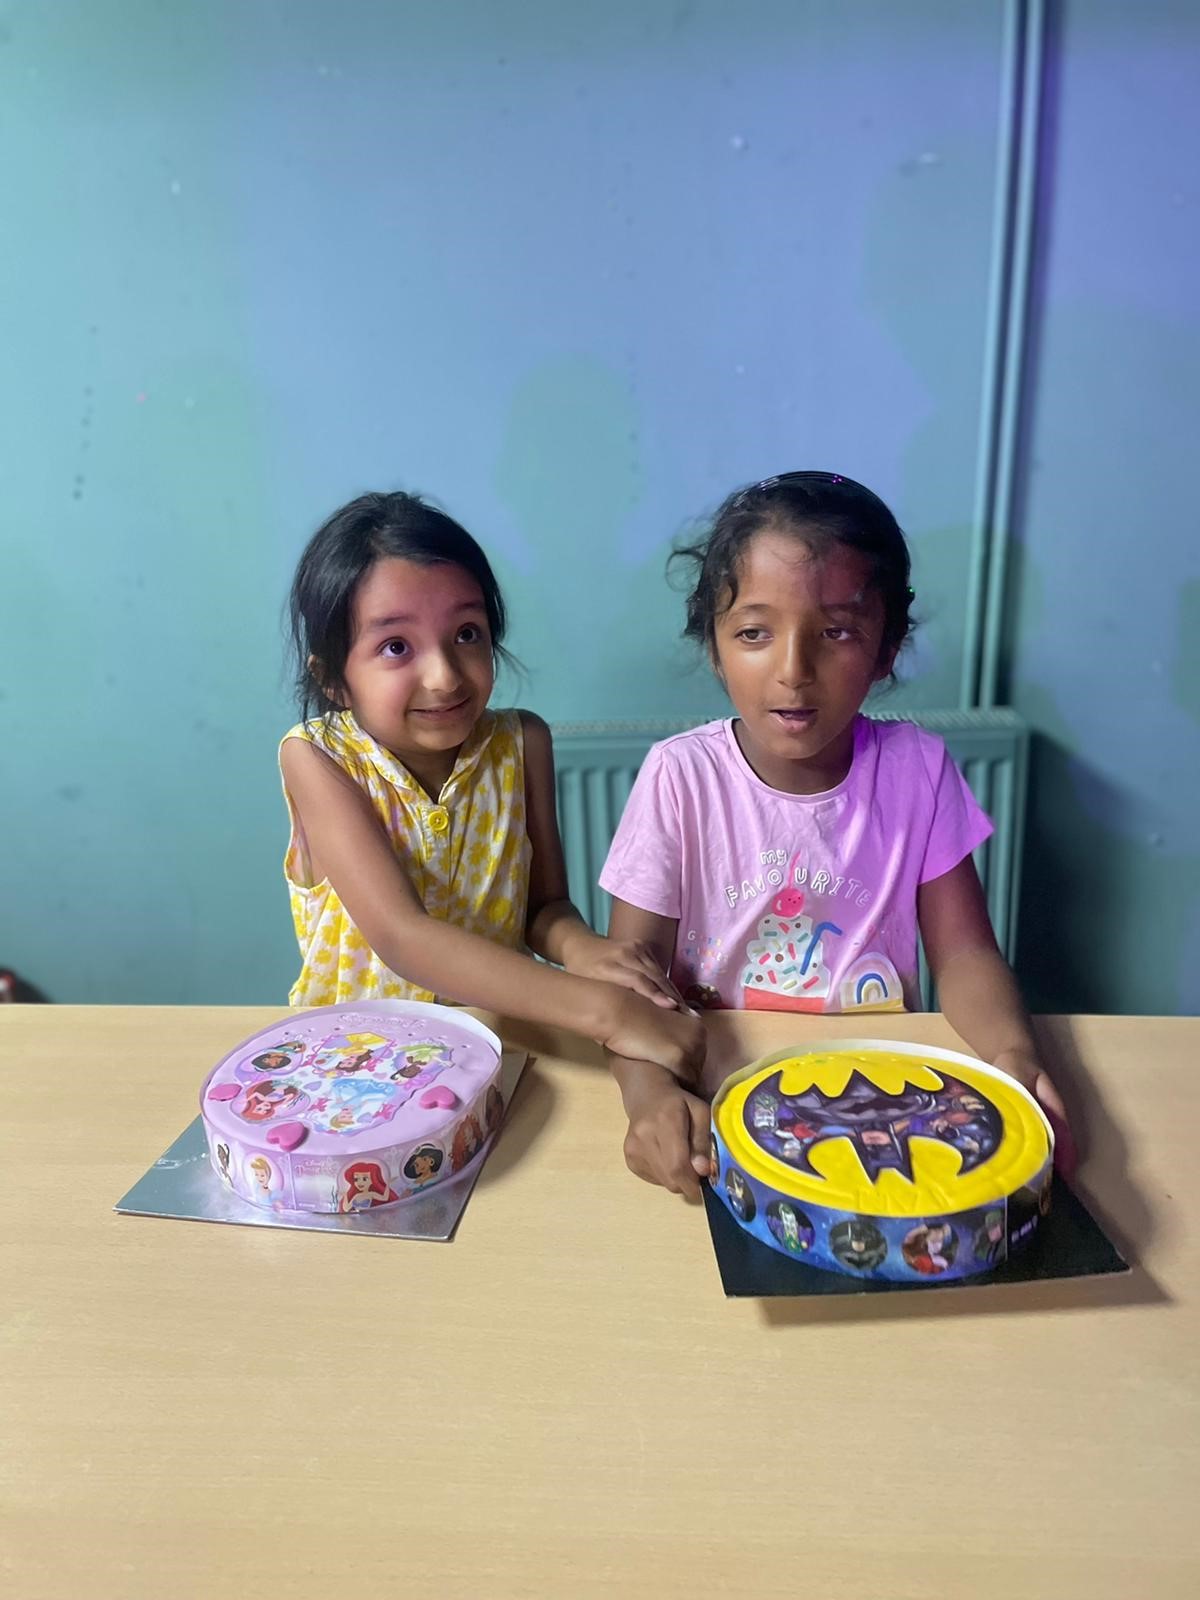 Daya and twin sister Jasmine with Disney princess and Batman cakes as they celebrated their 7th birthdays on September 22